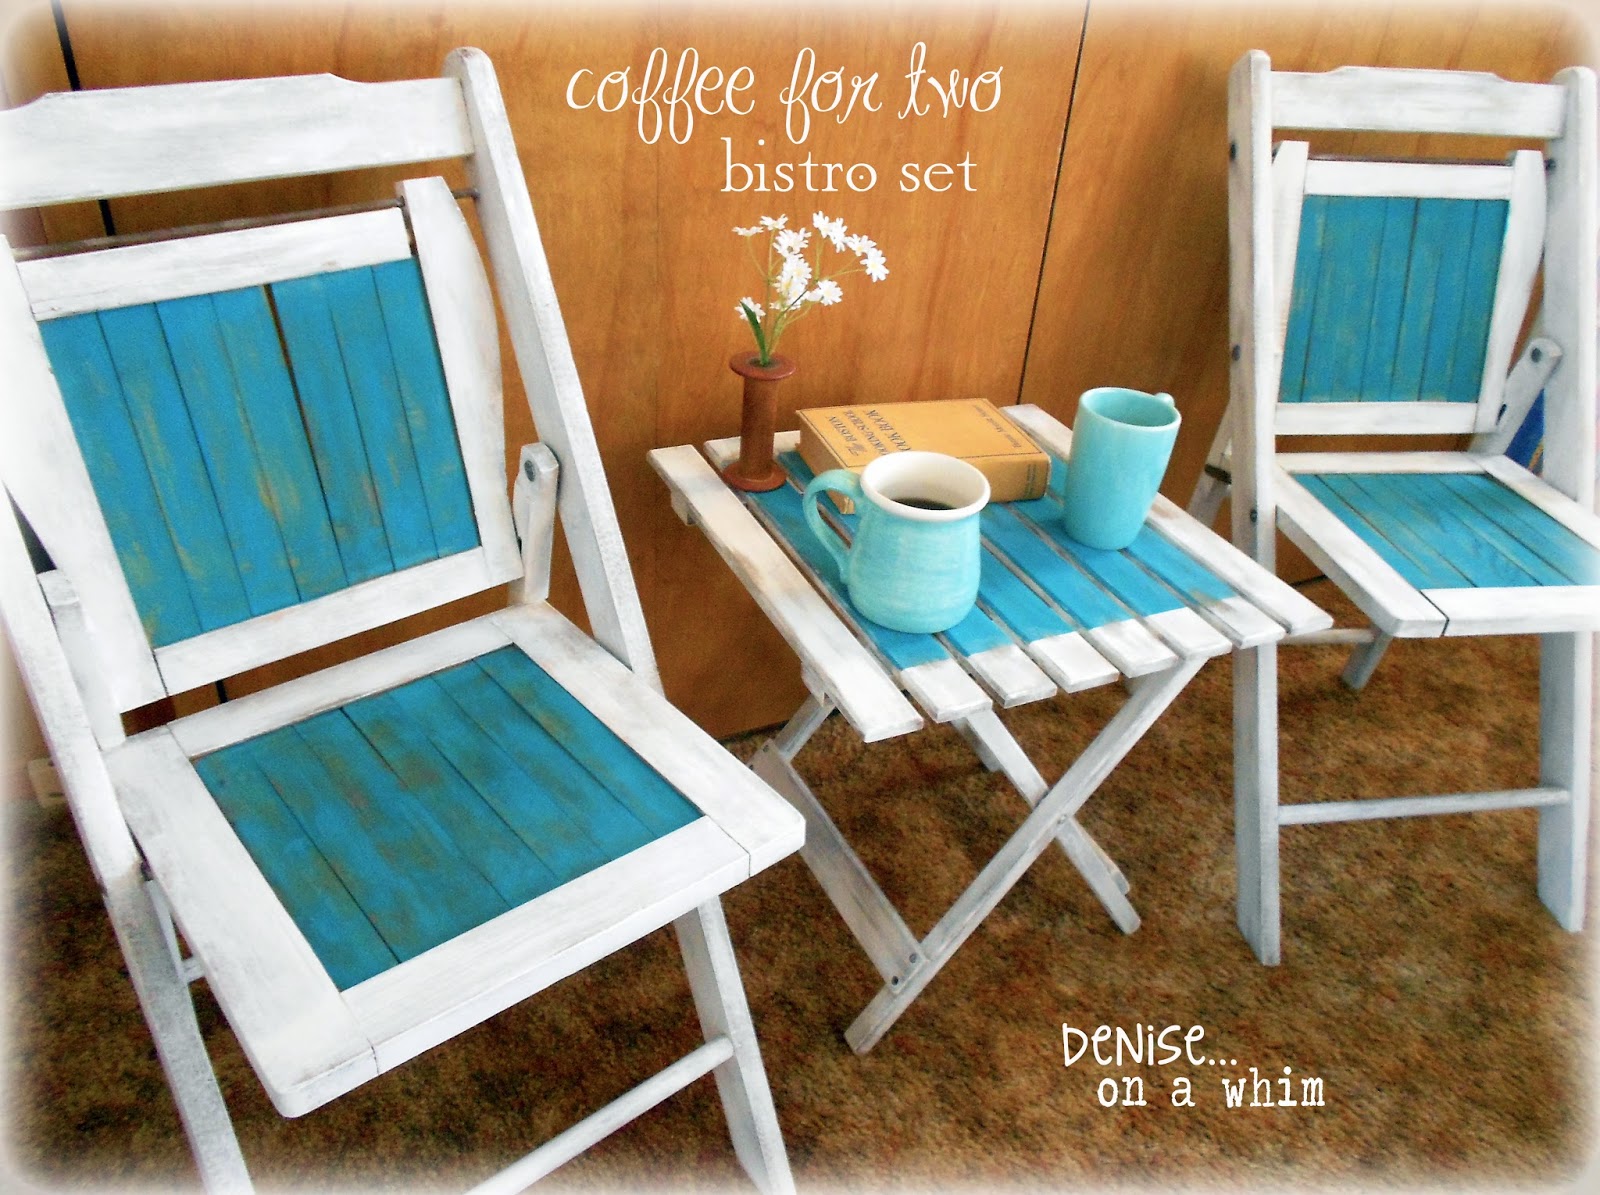 White and Teal Bistro Set from http://deniseonawhim.blogspot.com